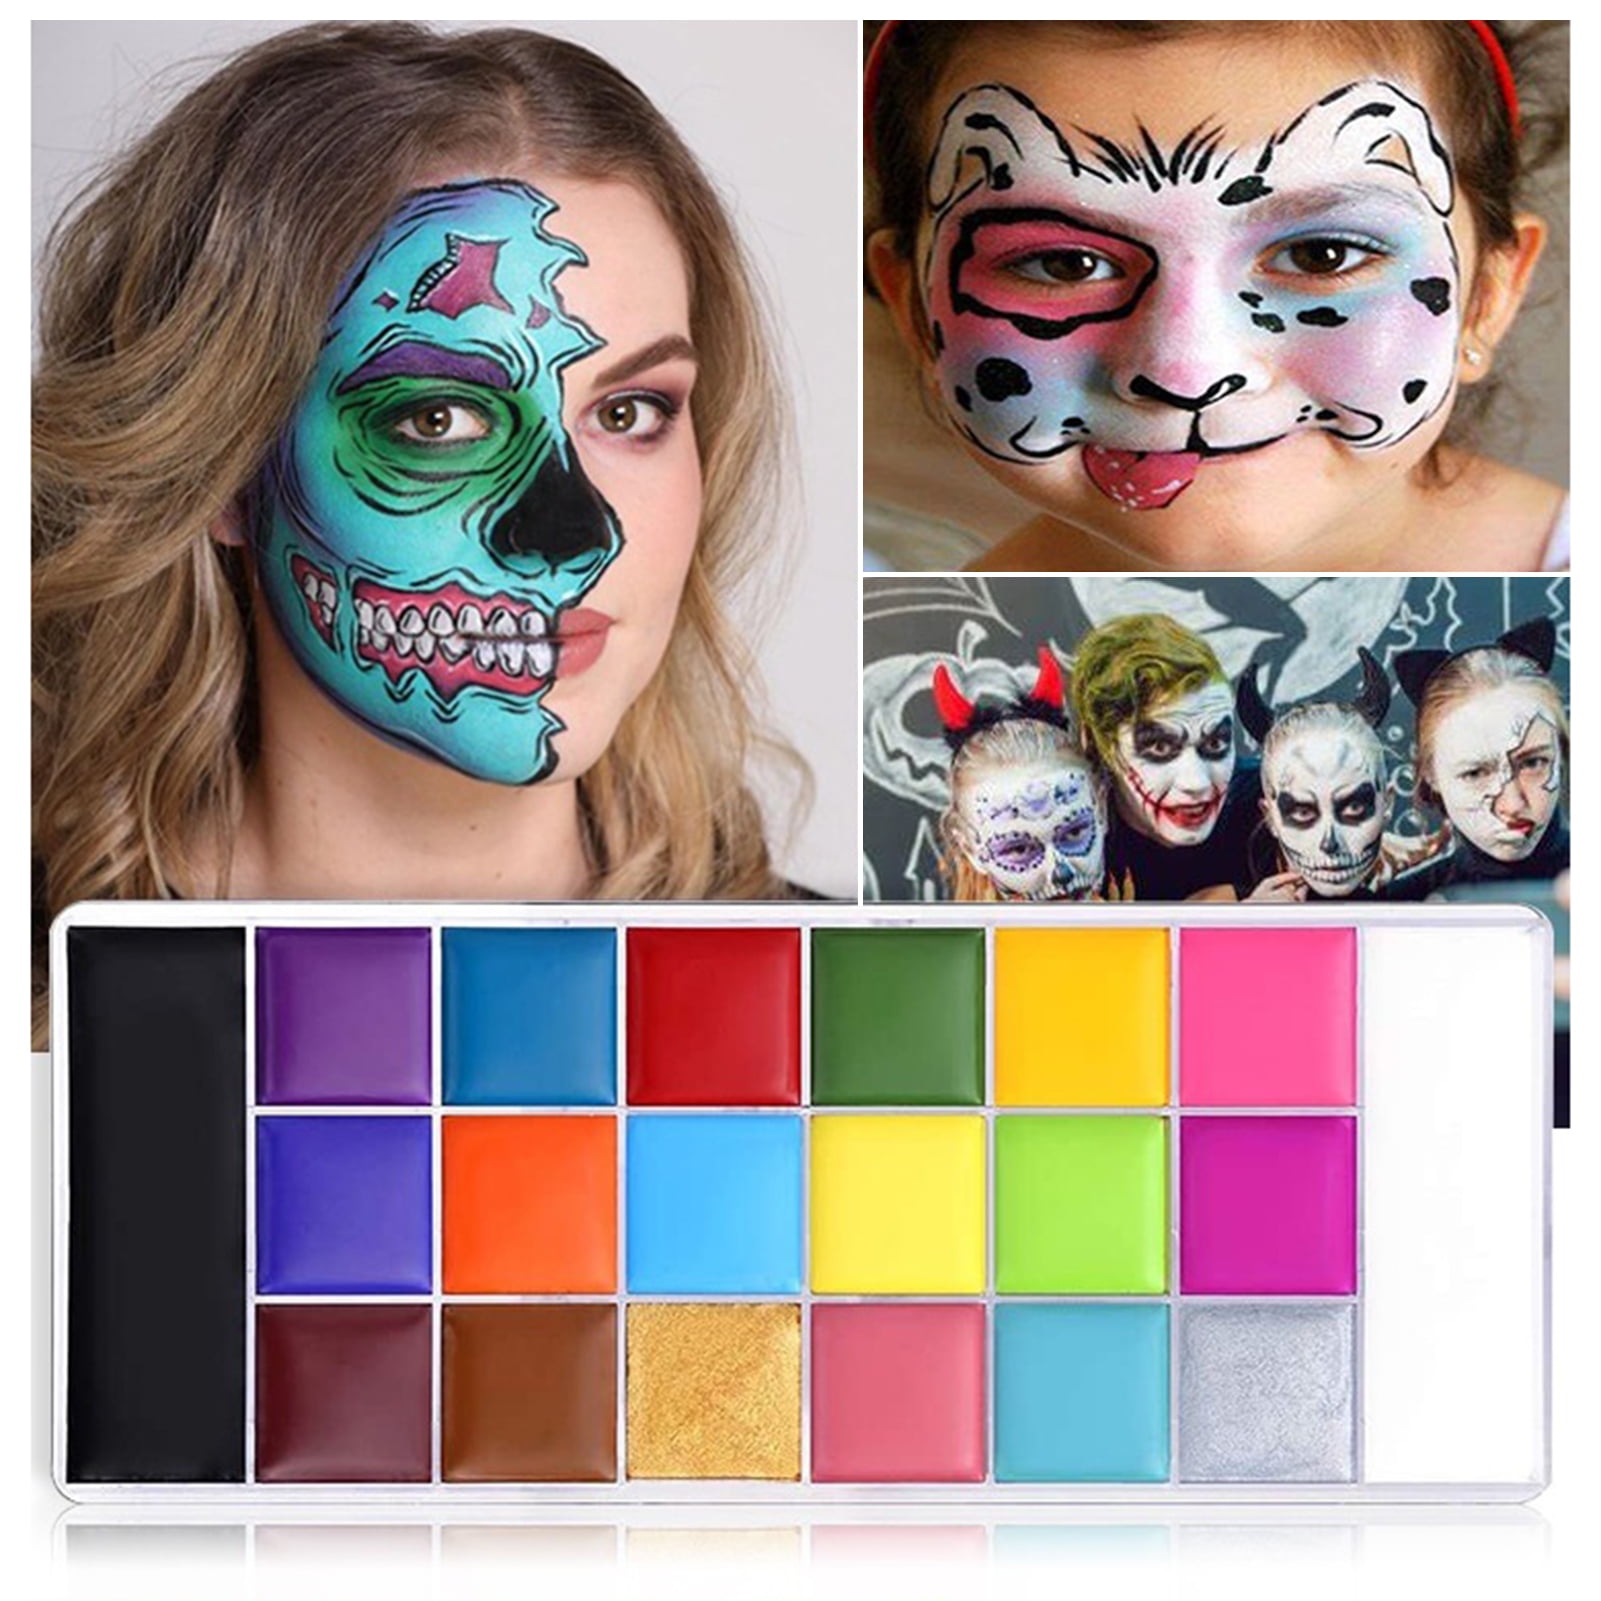 EBTOOLS Cosplay Makeup Paint,Face Painting Kit,Face Body Paint 30 Colors  Makeup Painting Kit for Cosplay Costumes Parties Festivals